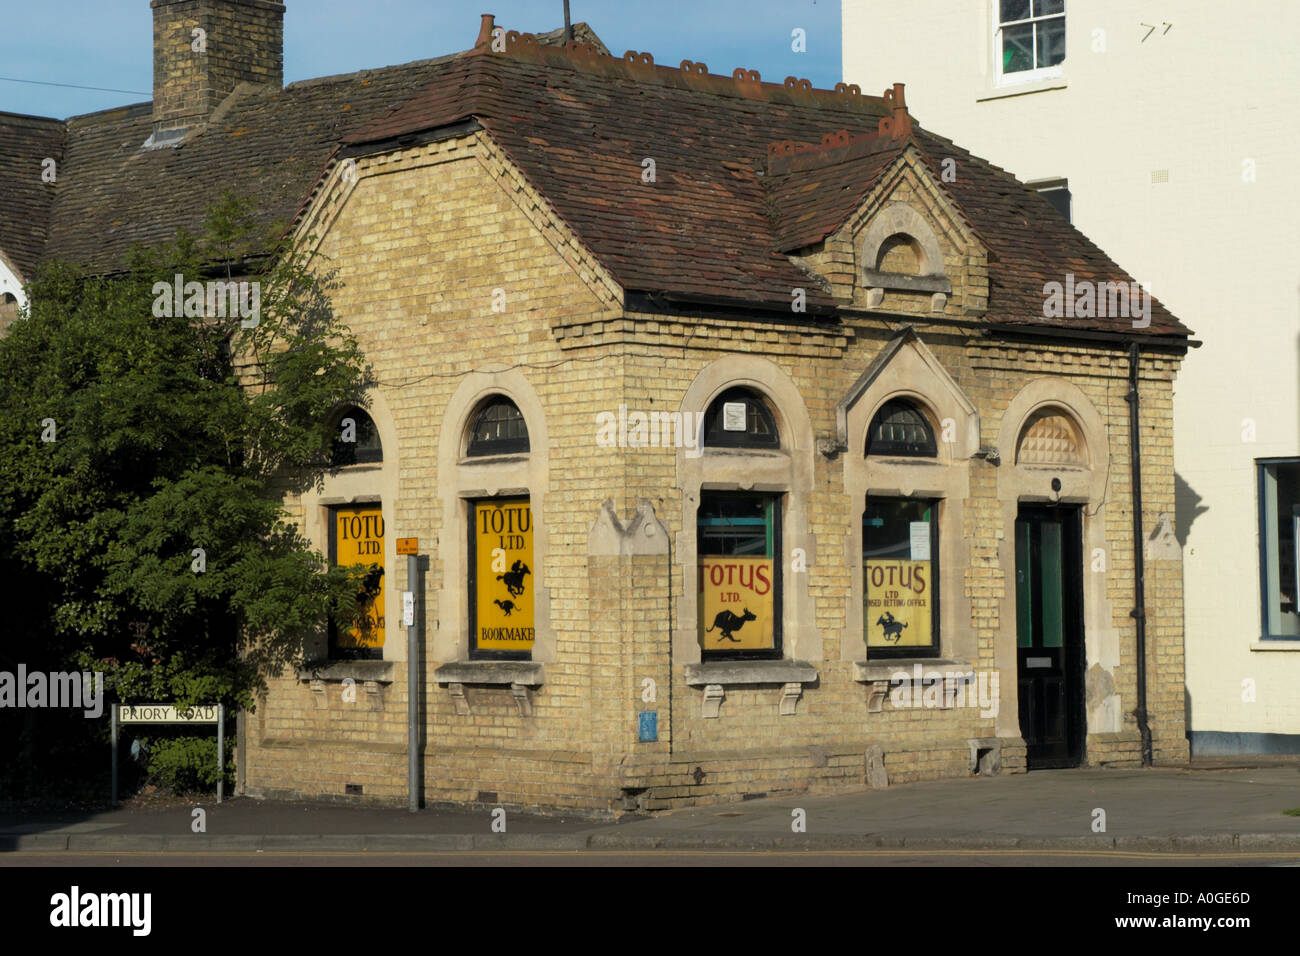 The Old Toll House St Ives Cambridgeshire now home to the Tote Stock Photo